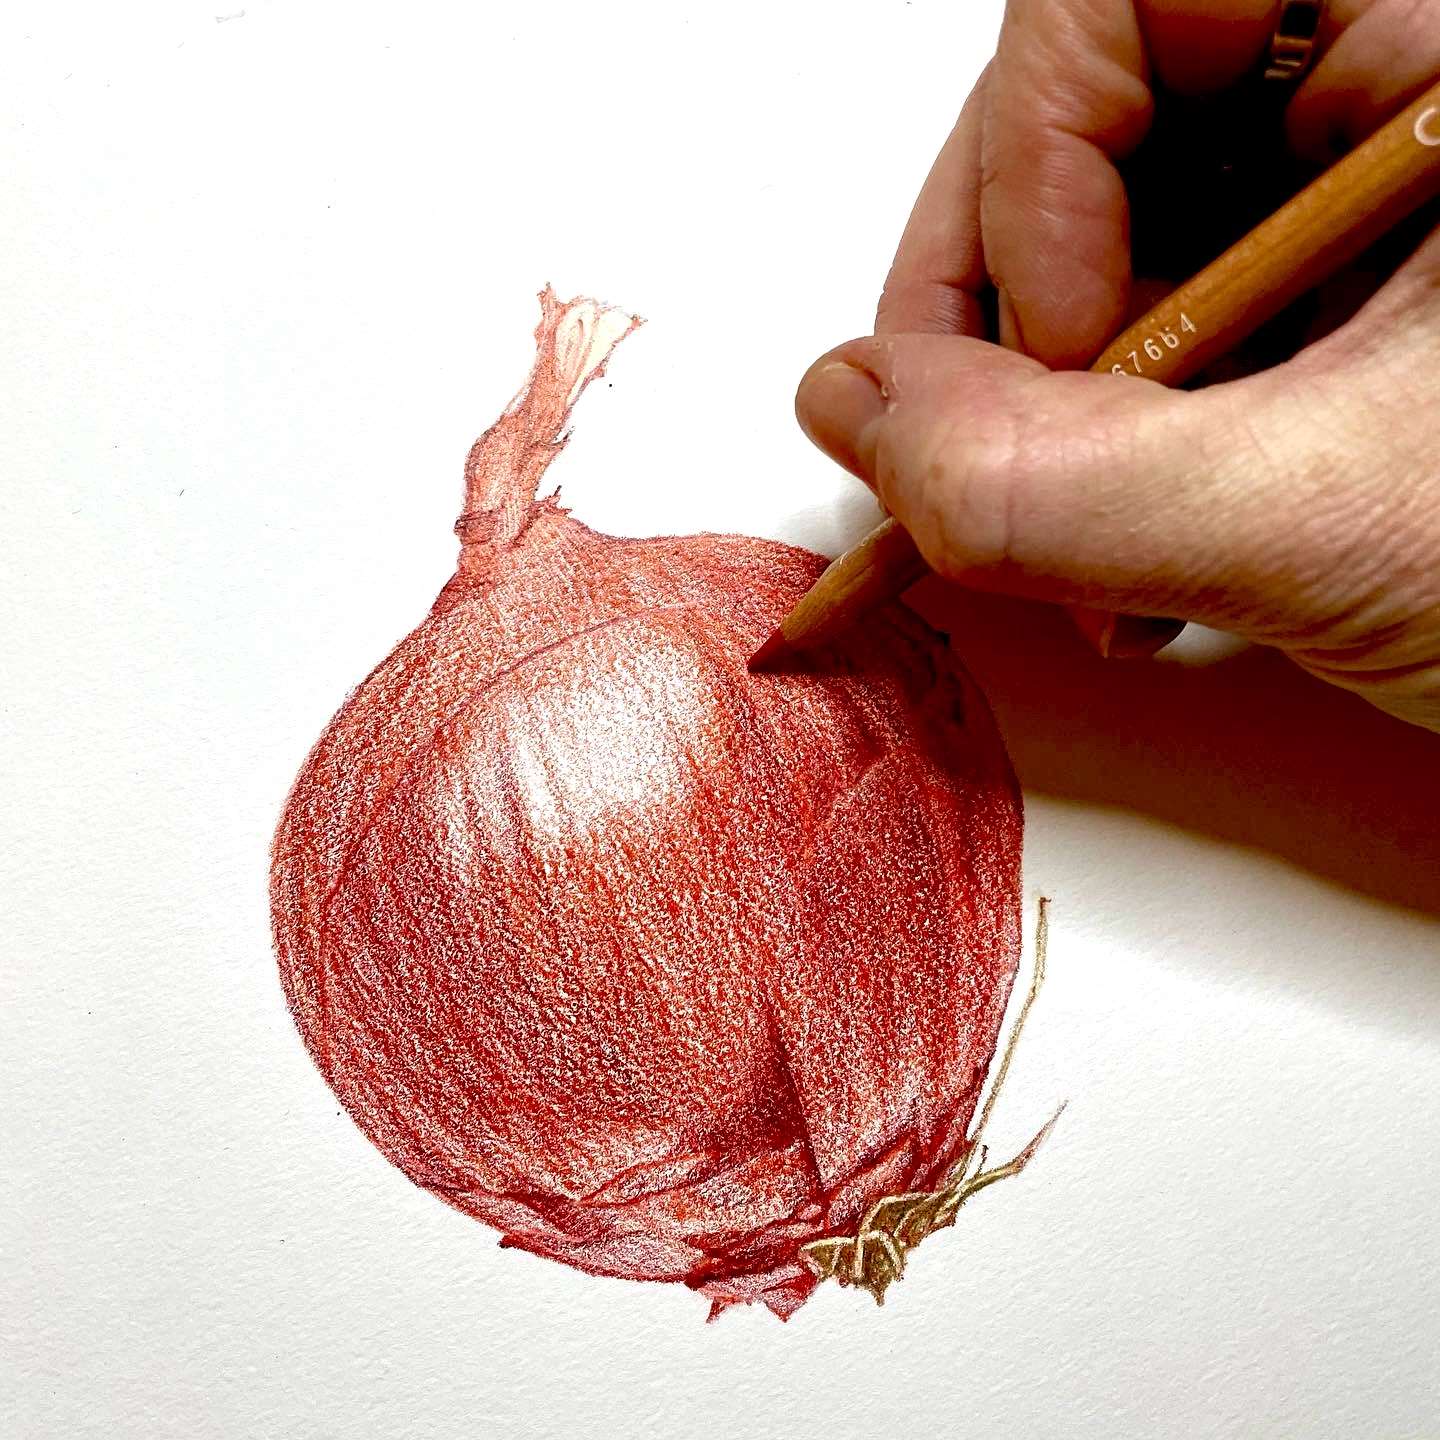 Pencil on Paper, Work in progress image of an onion being hand-drawn using coloured pencil.